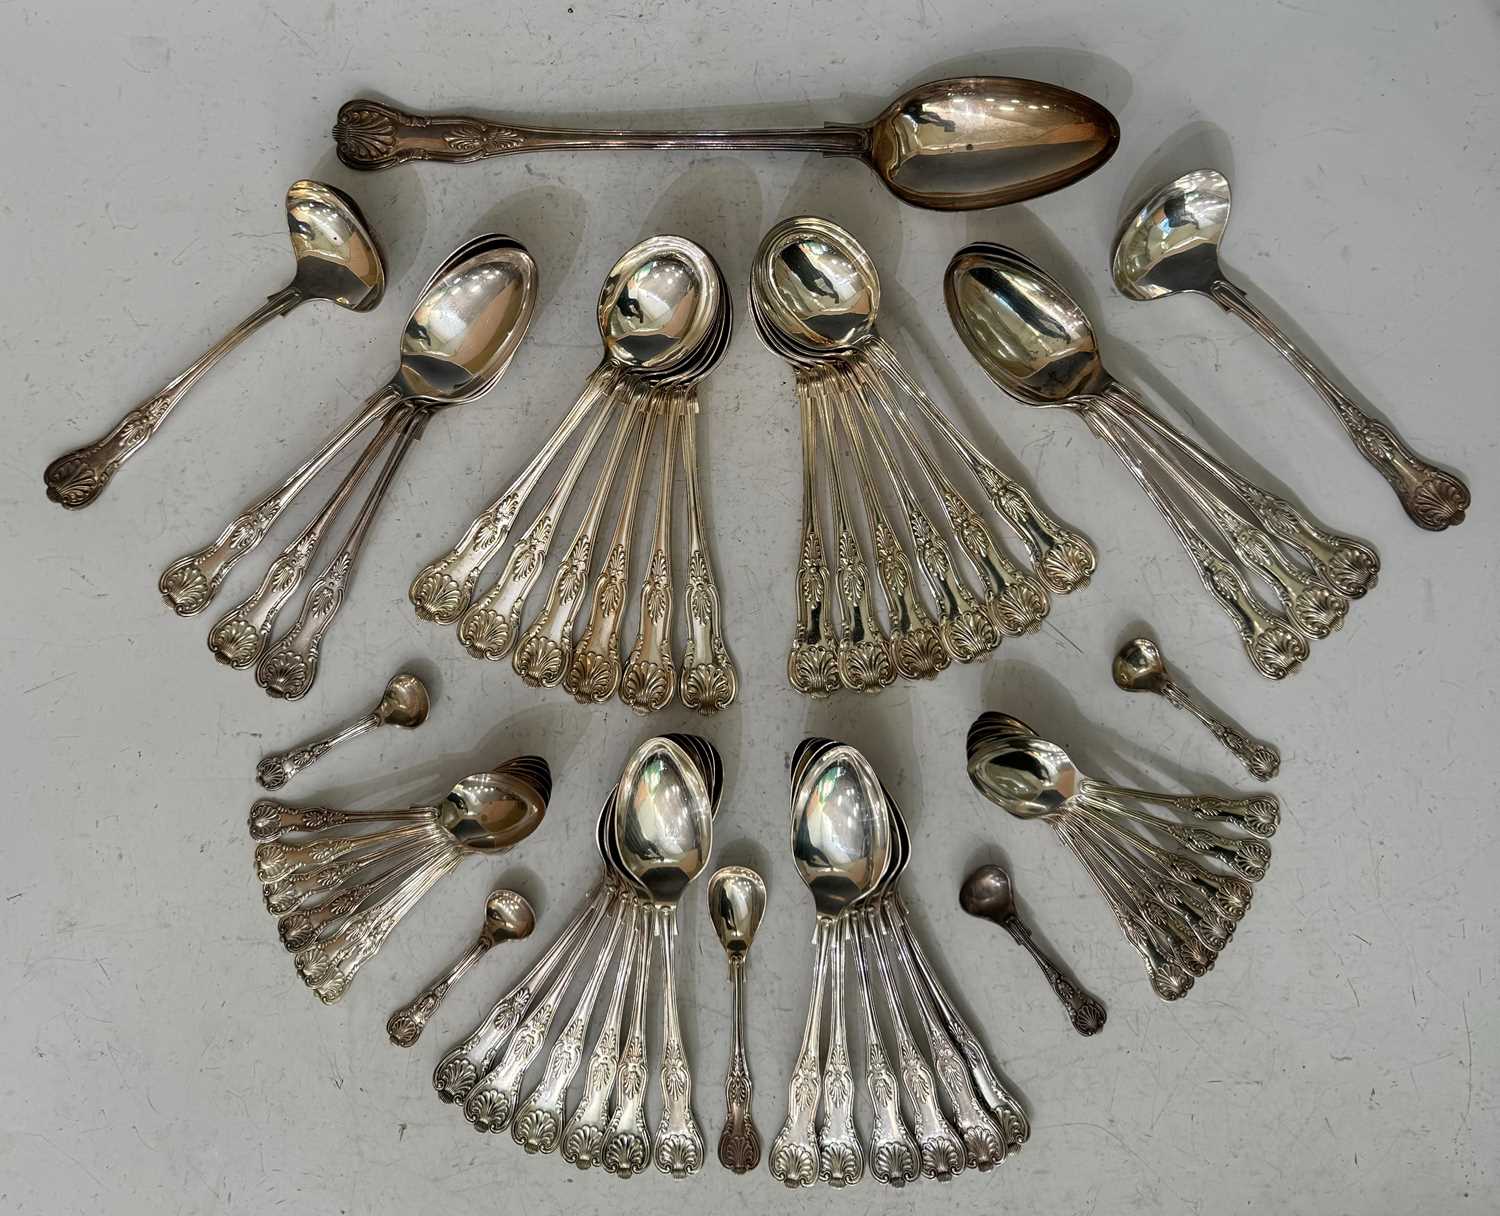 A collection of EPNS Kings pattern flatware, together with a Kings pattern serving spoon.